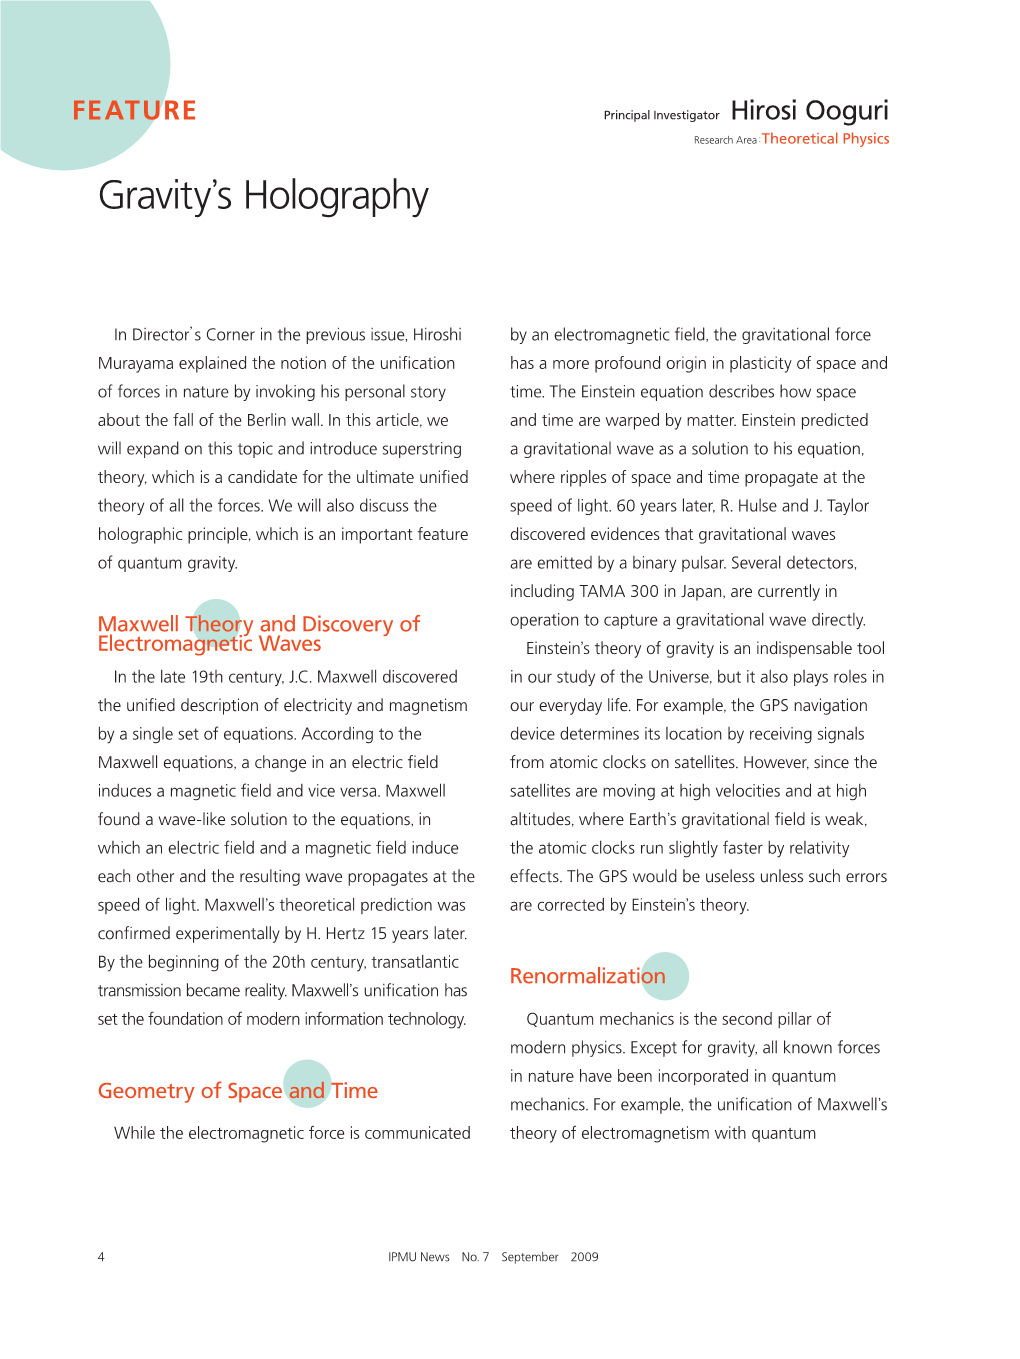 Gravitys Holography